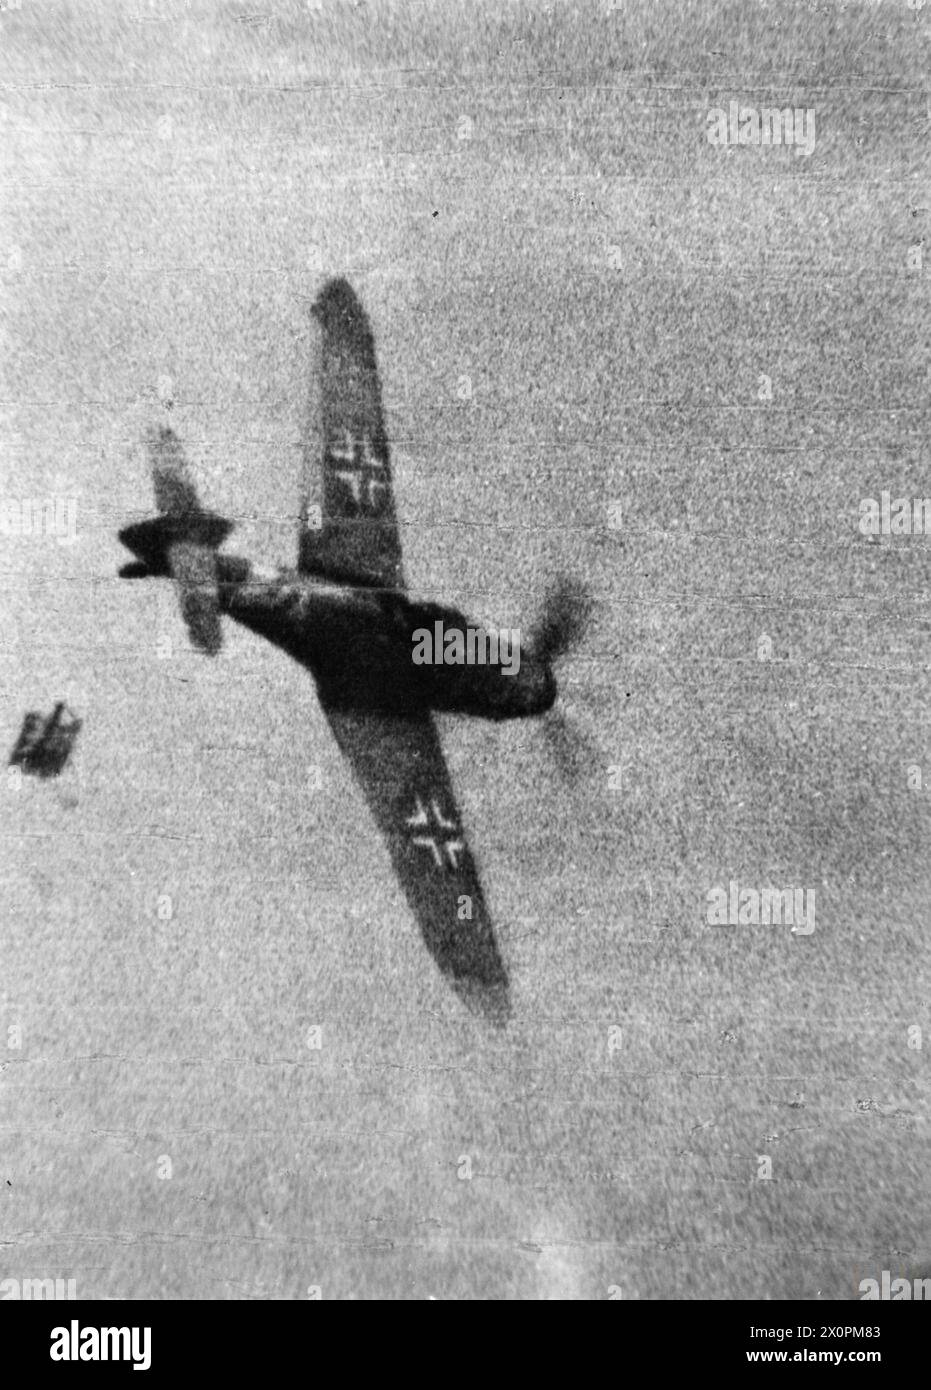 ROYAL AIR FORCE: ITALY, THE BALKANS AND SOUTH-EAST EUROPE, 1942-1945. - Still from camera gun footage shot from a Supermarine Spitfire flown by Warrant Officer B Bunting RAAF of No. 93 Squadron RAF, showing the cockpit canopy breaking away from a Messerschmitt Bf 109G after it had received fire from Bunting's aircraft over Italy. The pilot baled out shortly afterwards Royal Air Force, 93 Squadron, German Air Force (Third Reich) Stock Photo